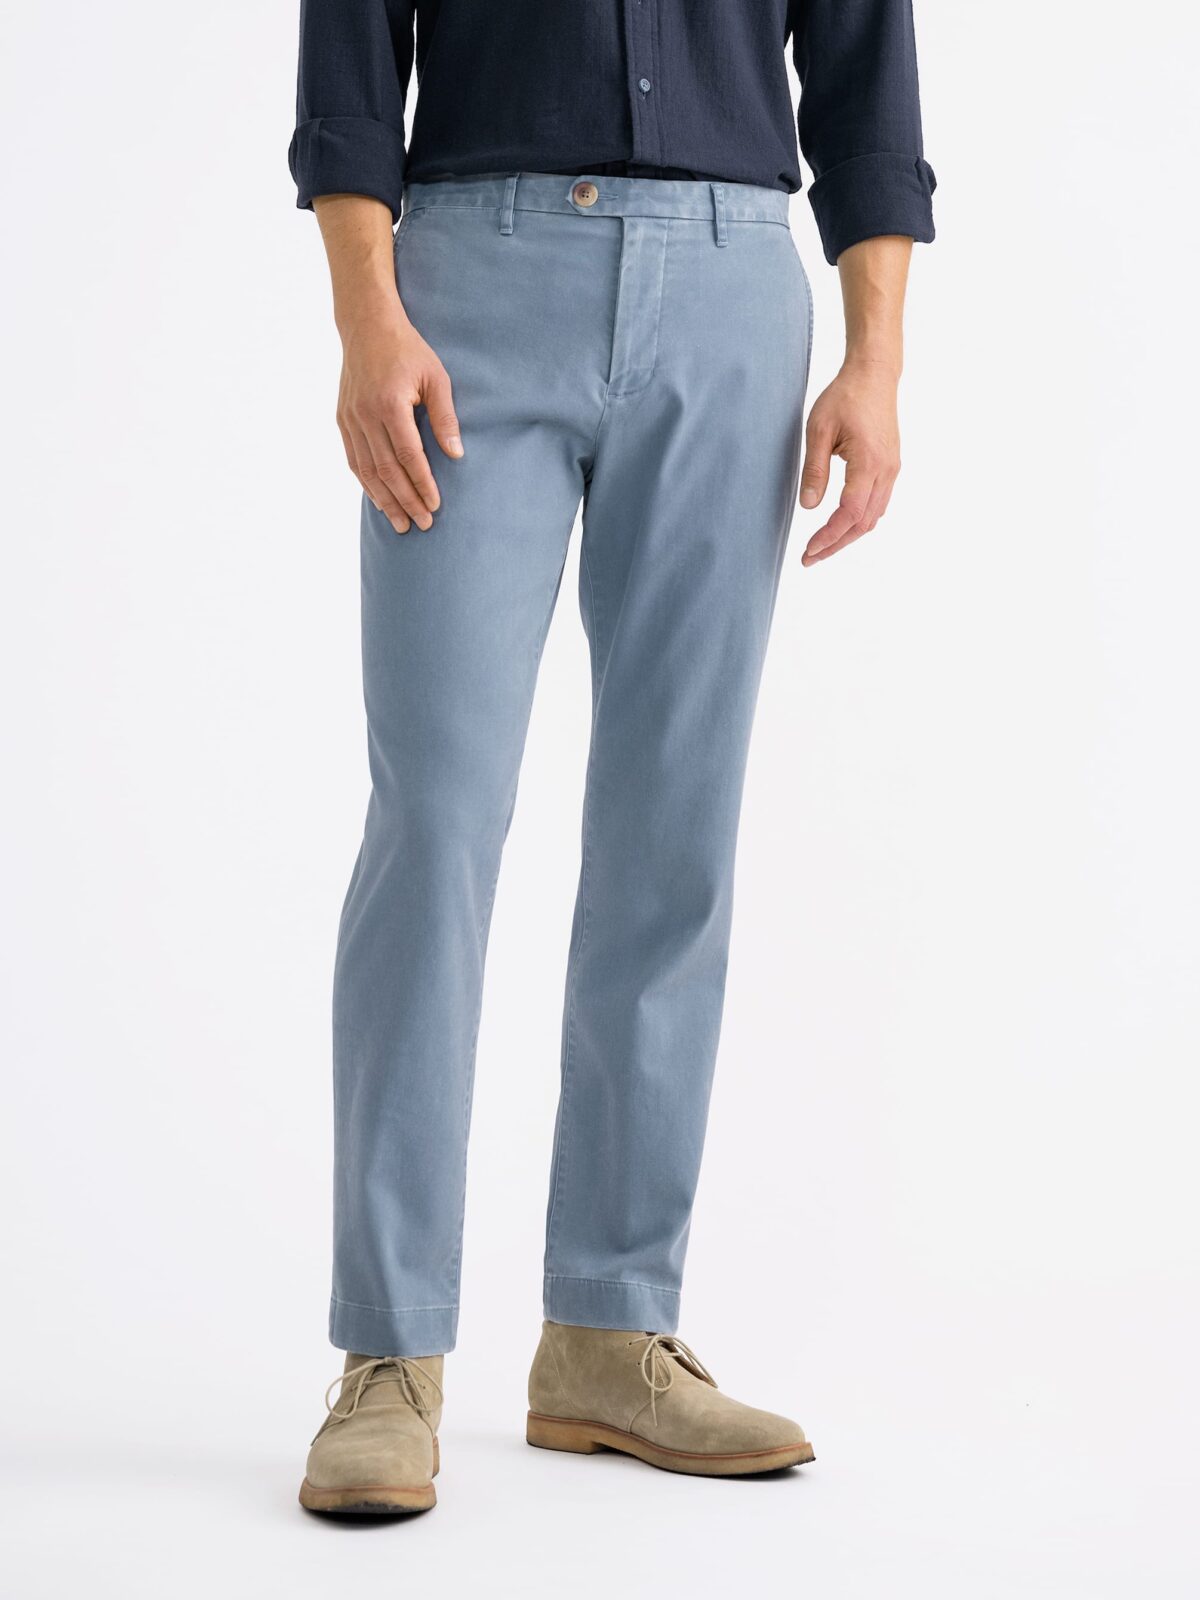 Buy One Friday Boys Classic Slim Fit Chinos Trousers - Trousers for Boys  22722910 | Myntra